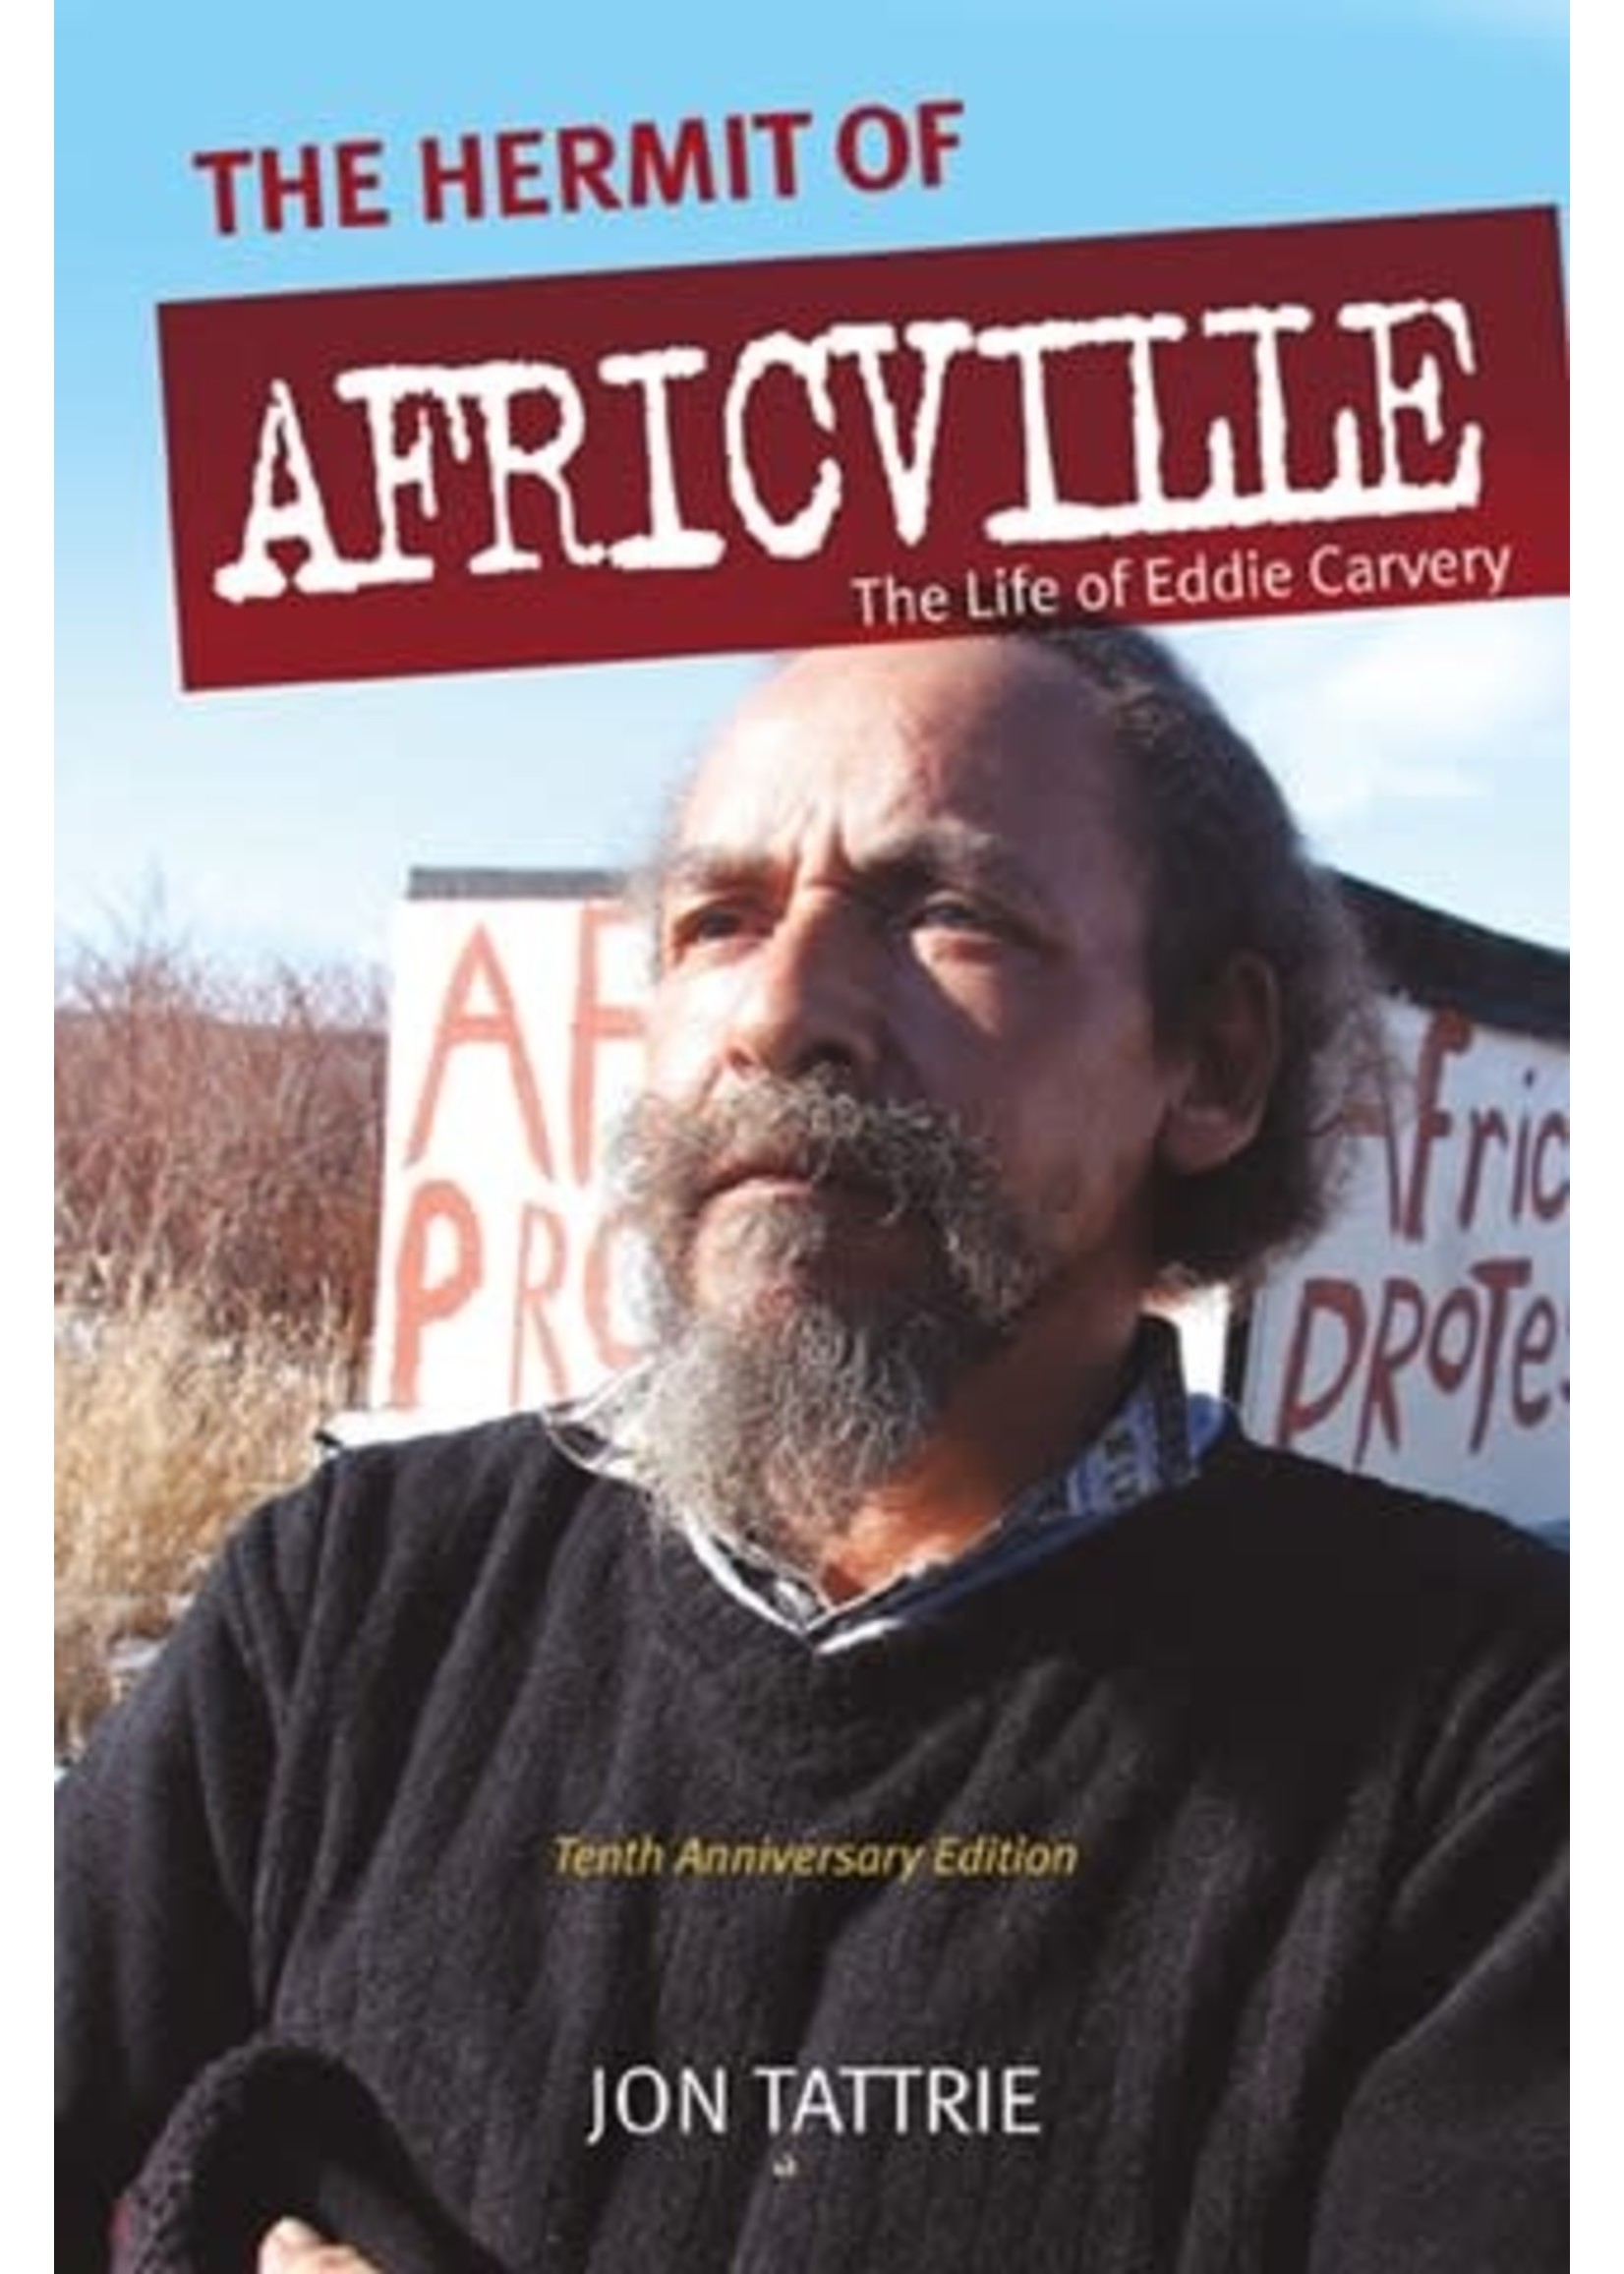 The Hermit of Africville: The Life of Eddie Carvery by Jon Tattrie